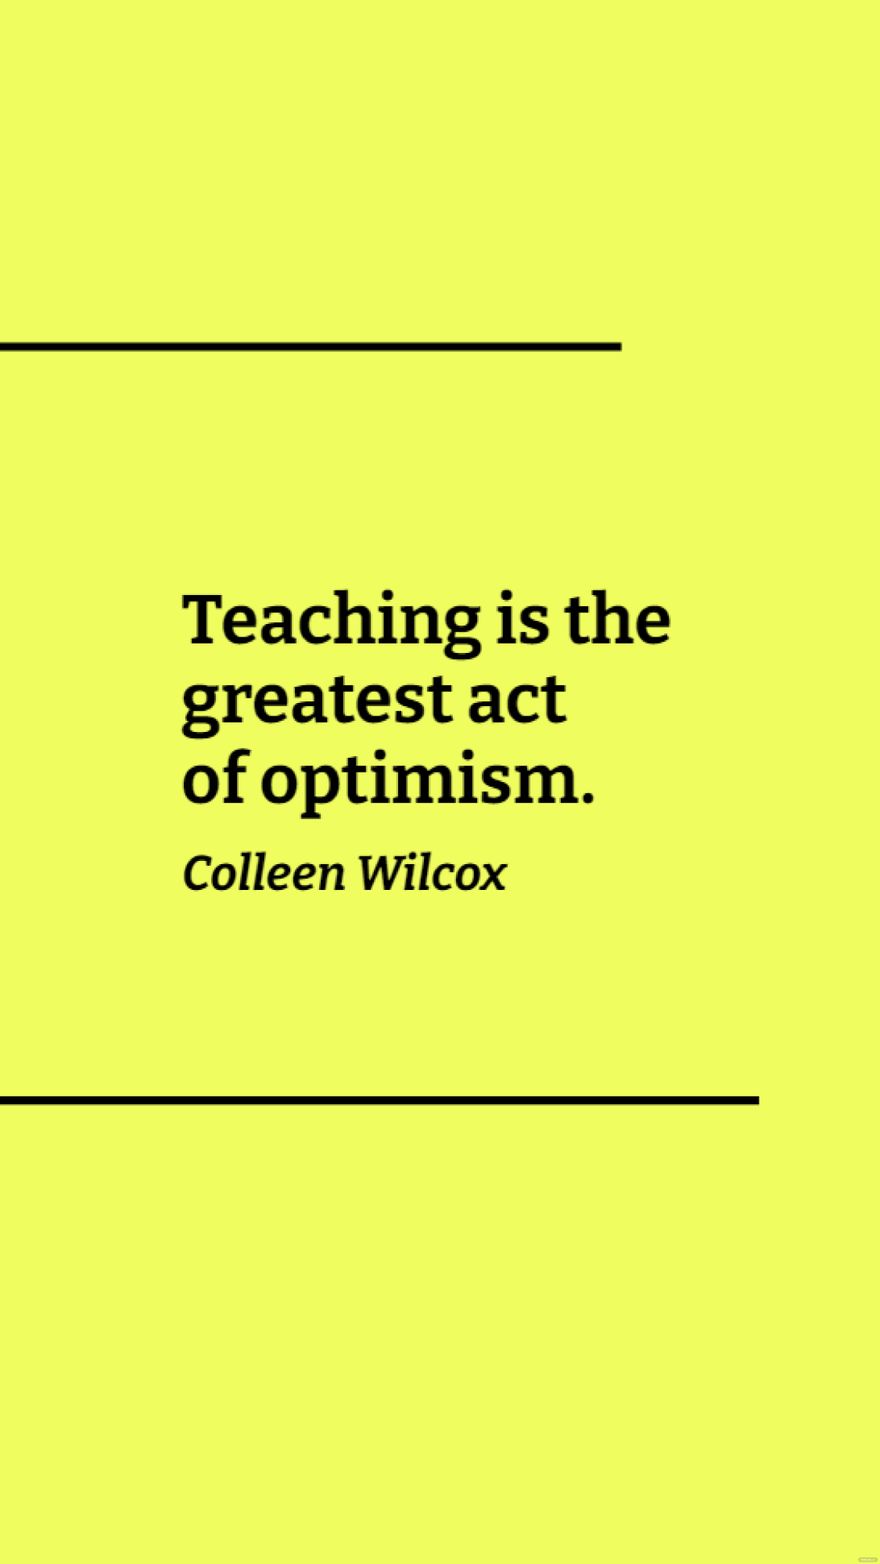 free-colleen-wilcox-teaching-is-the-greatest-act-of-optimism-jpg